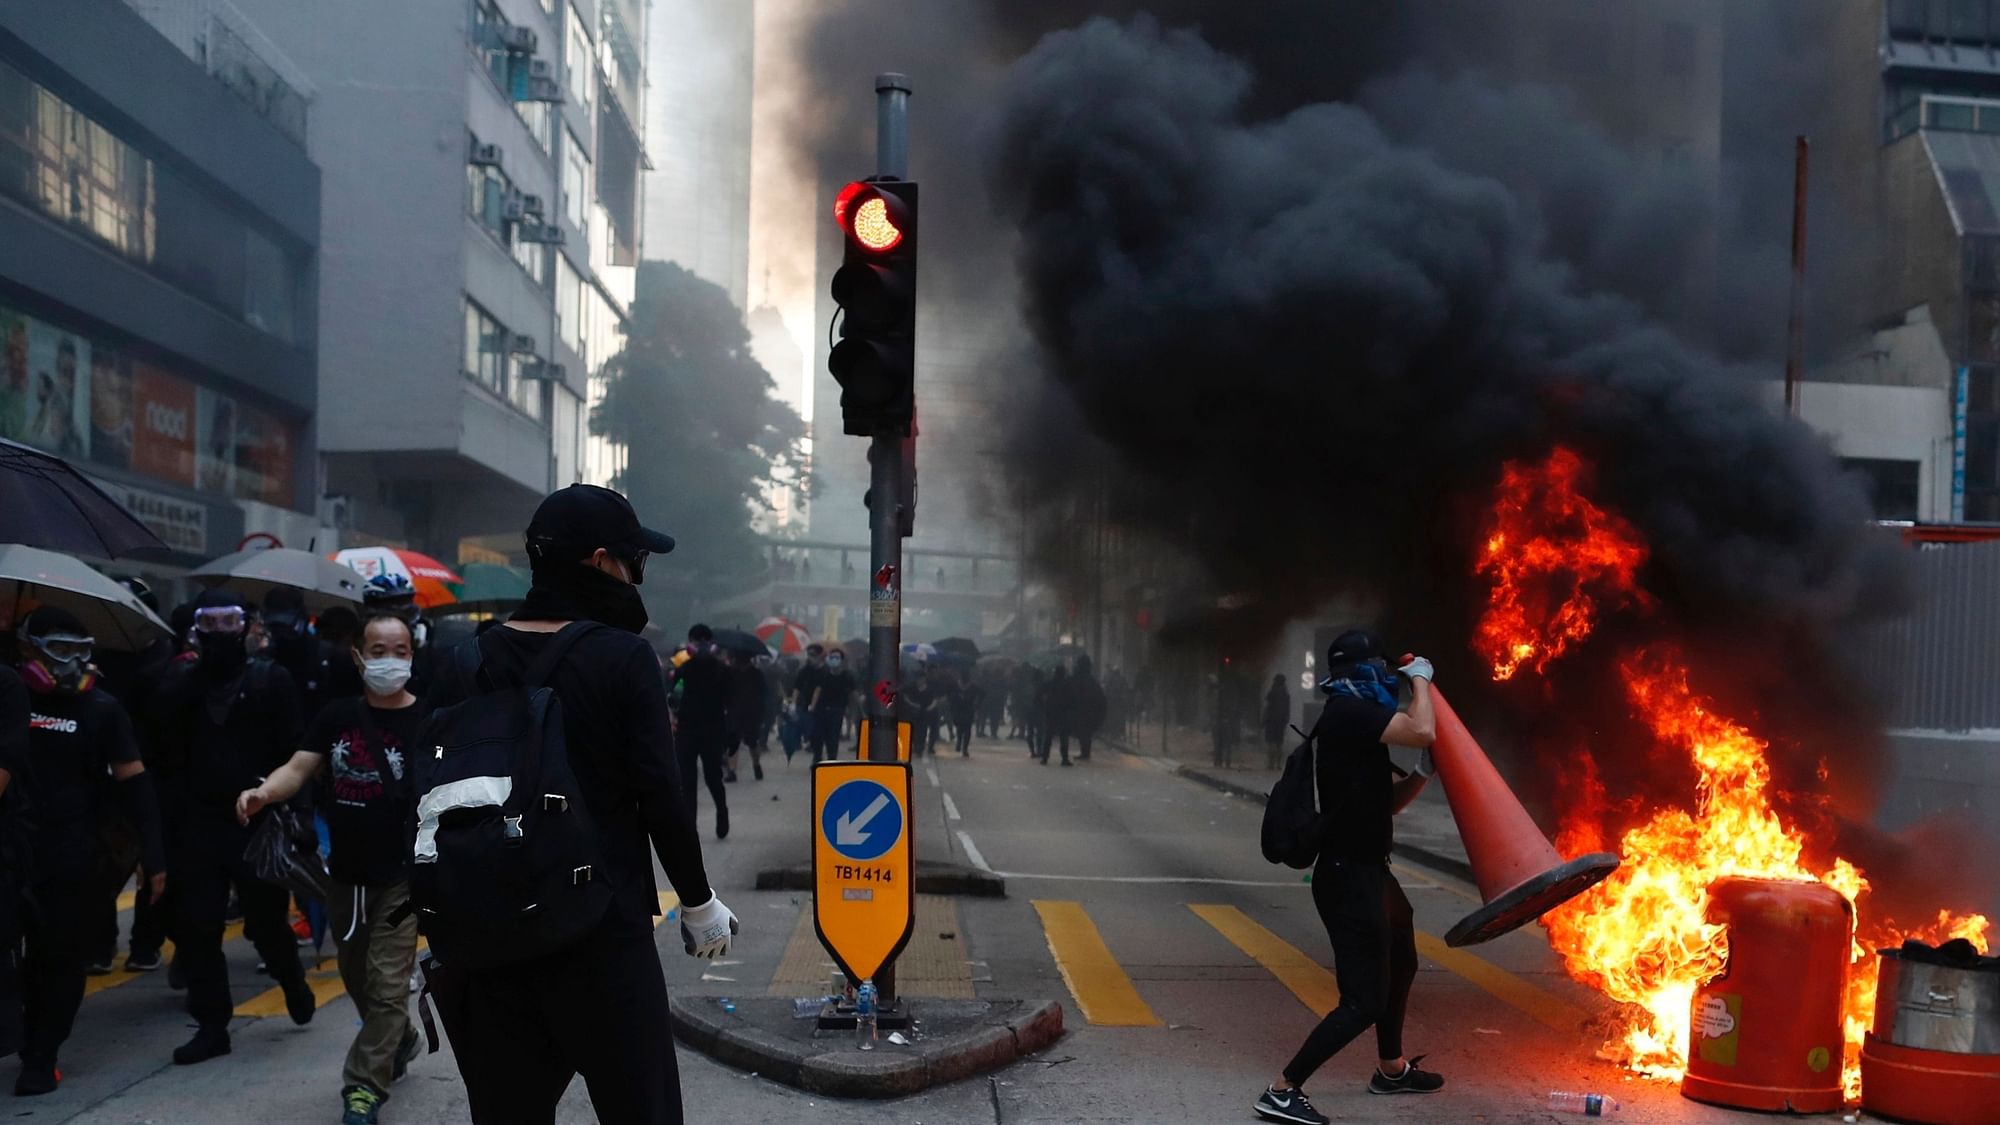 Anti-government protesters set fire to block traffic in Hong Kong.